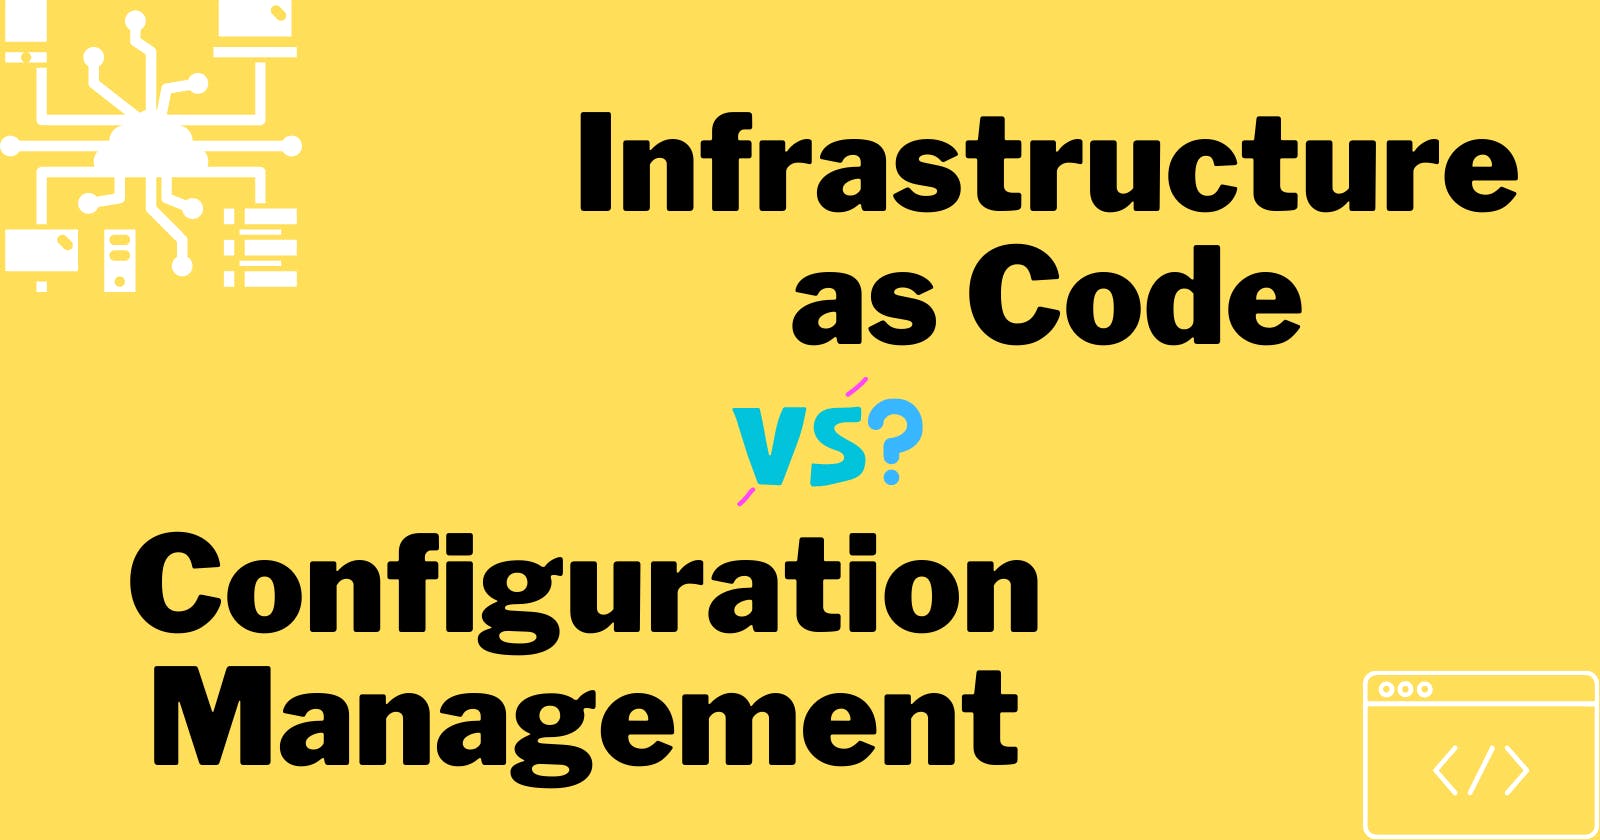 Understanding Infrastructure as Code and Configuration Management